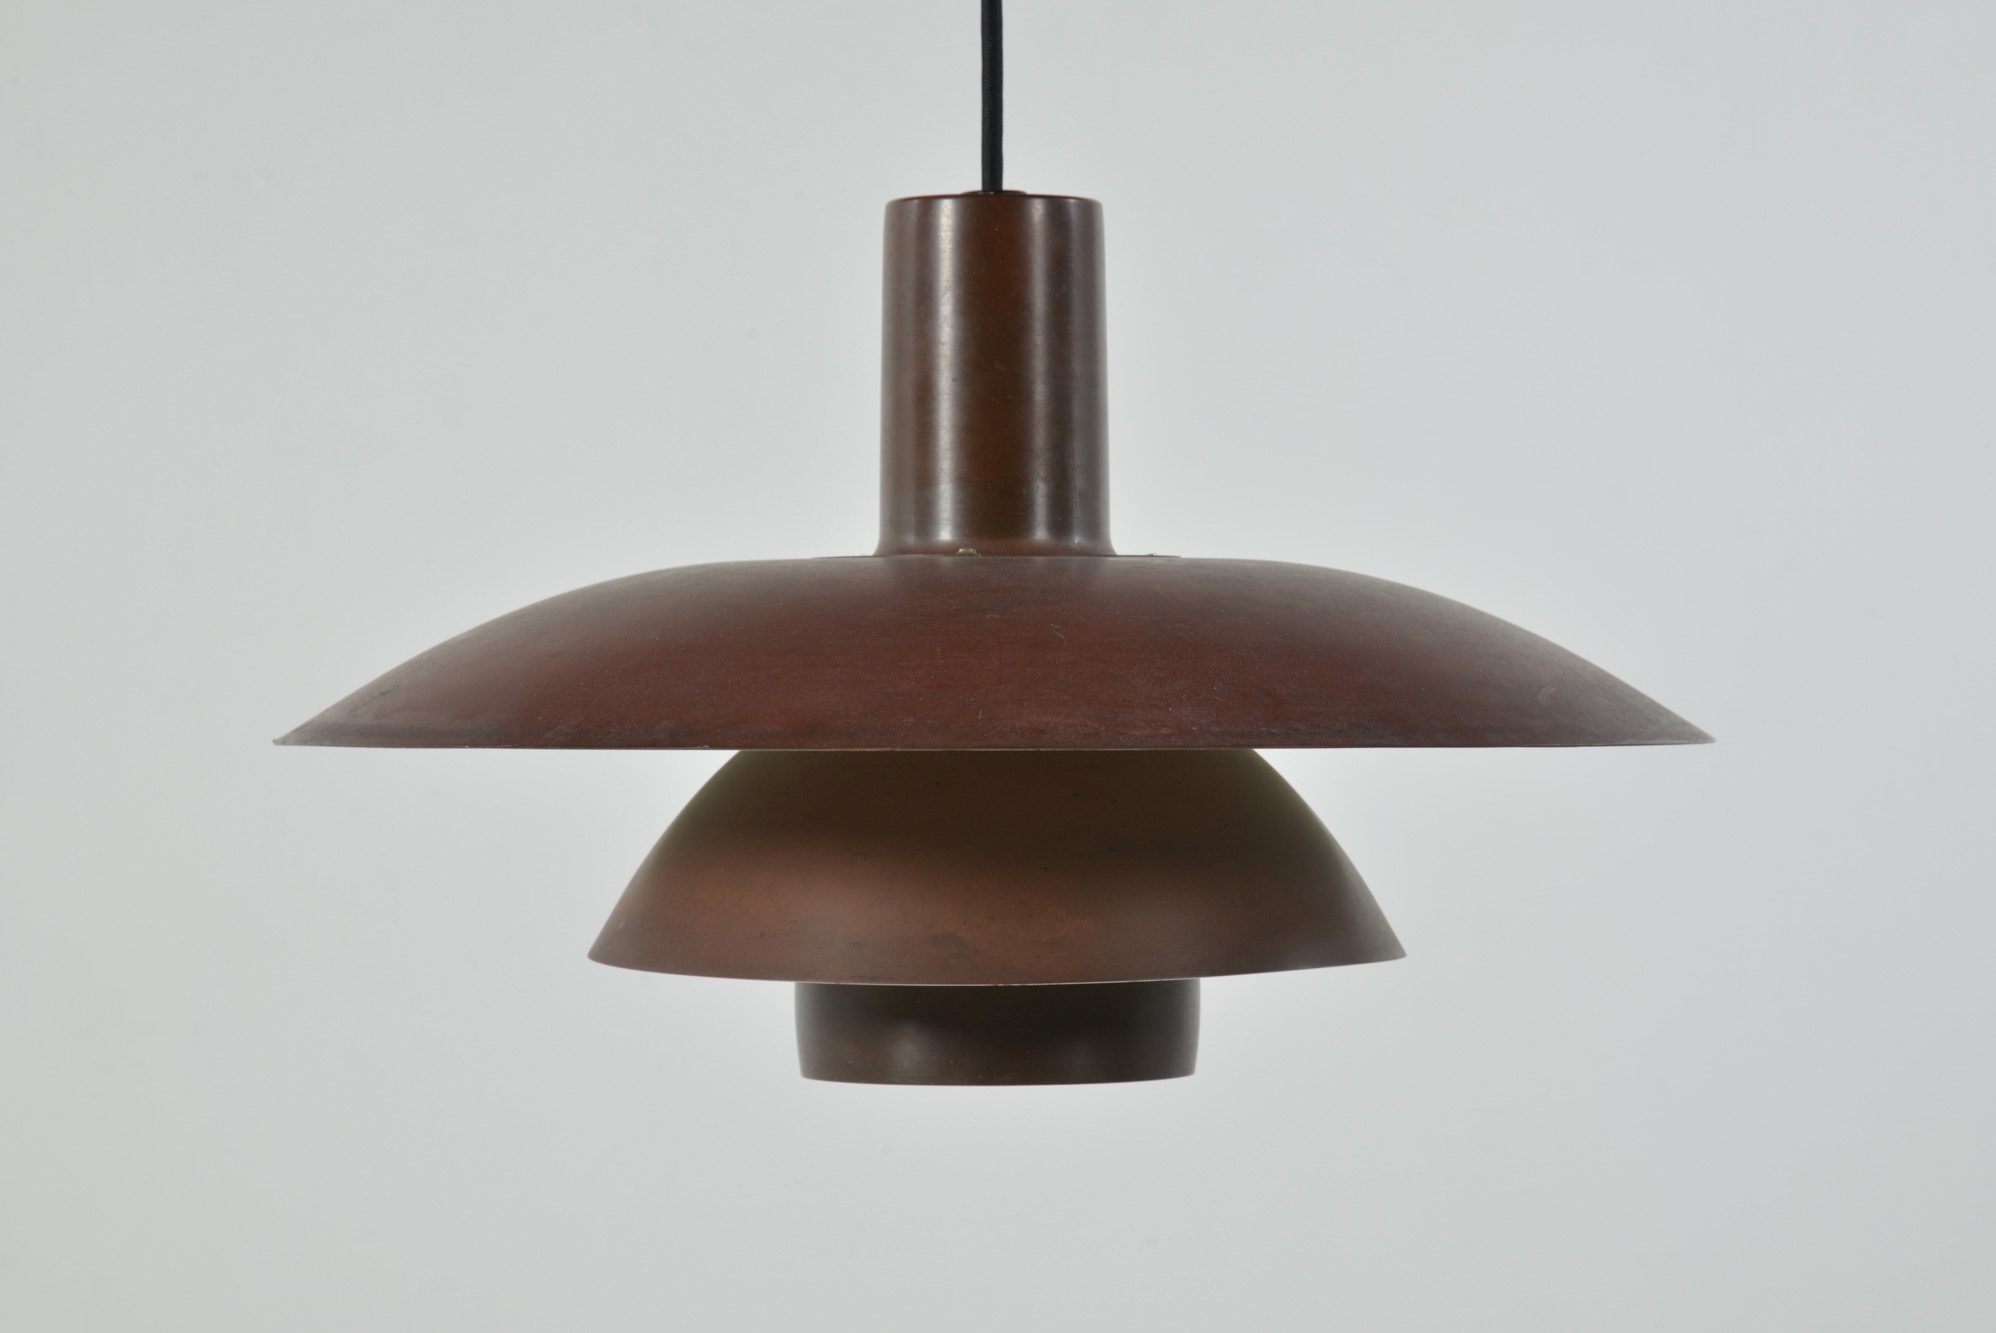 Louis Poulsen PH4½-4 pendant lamp with patinated copper shade 